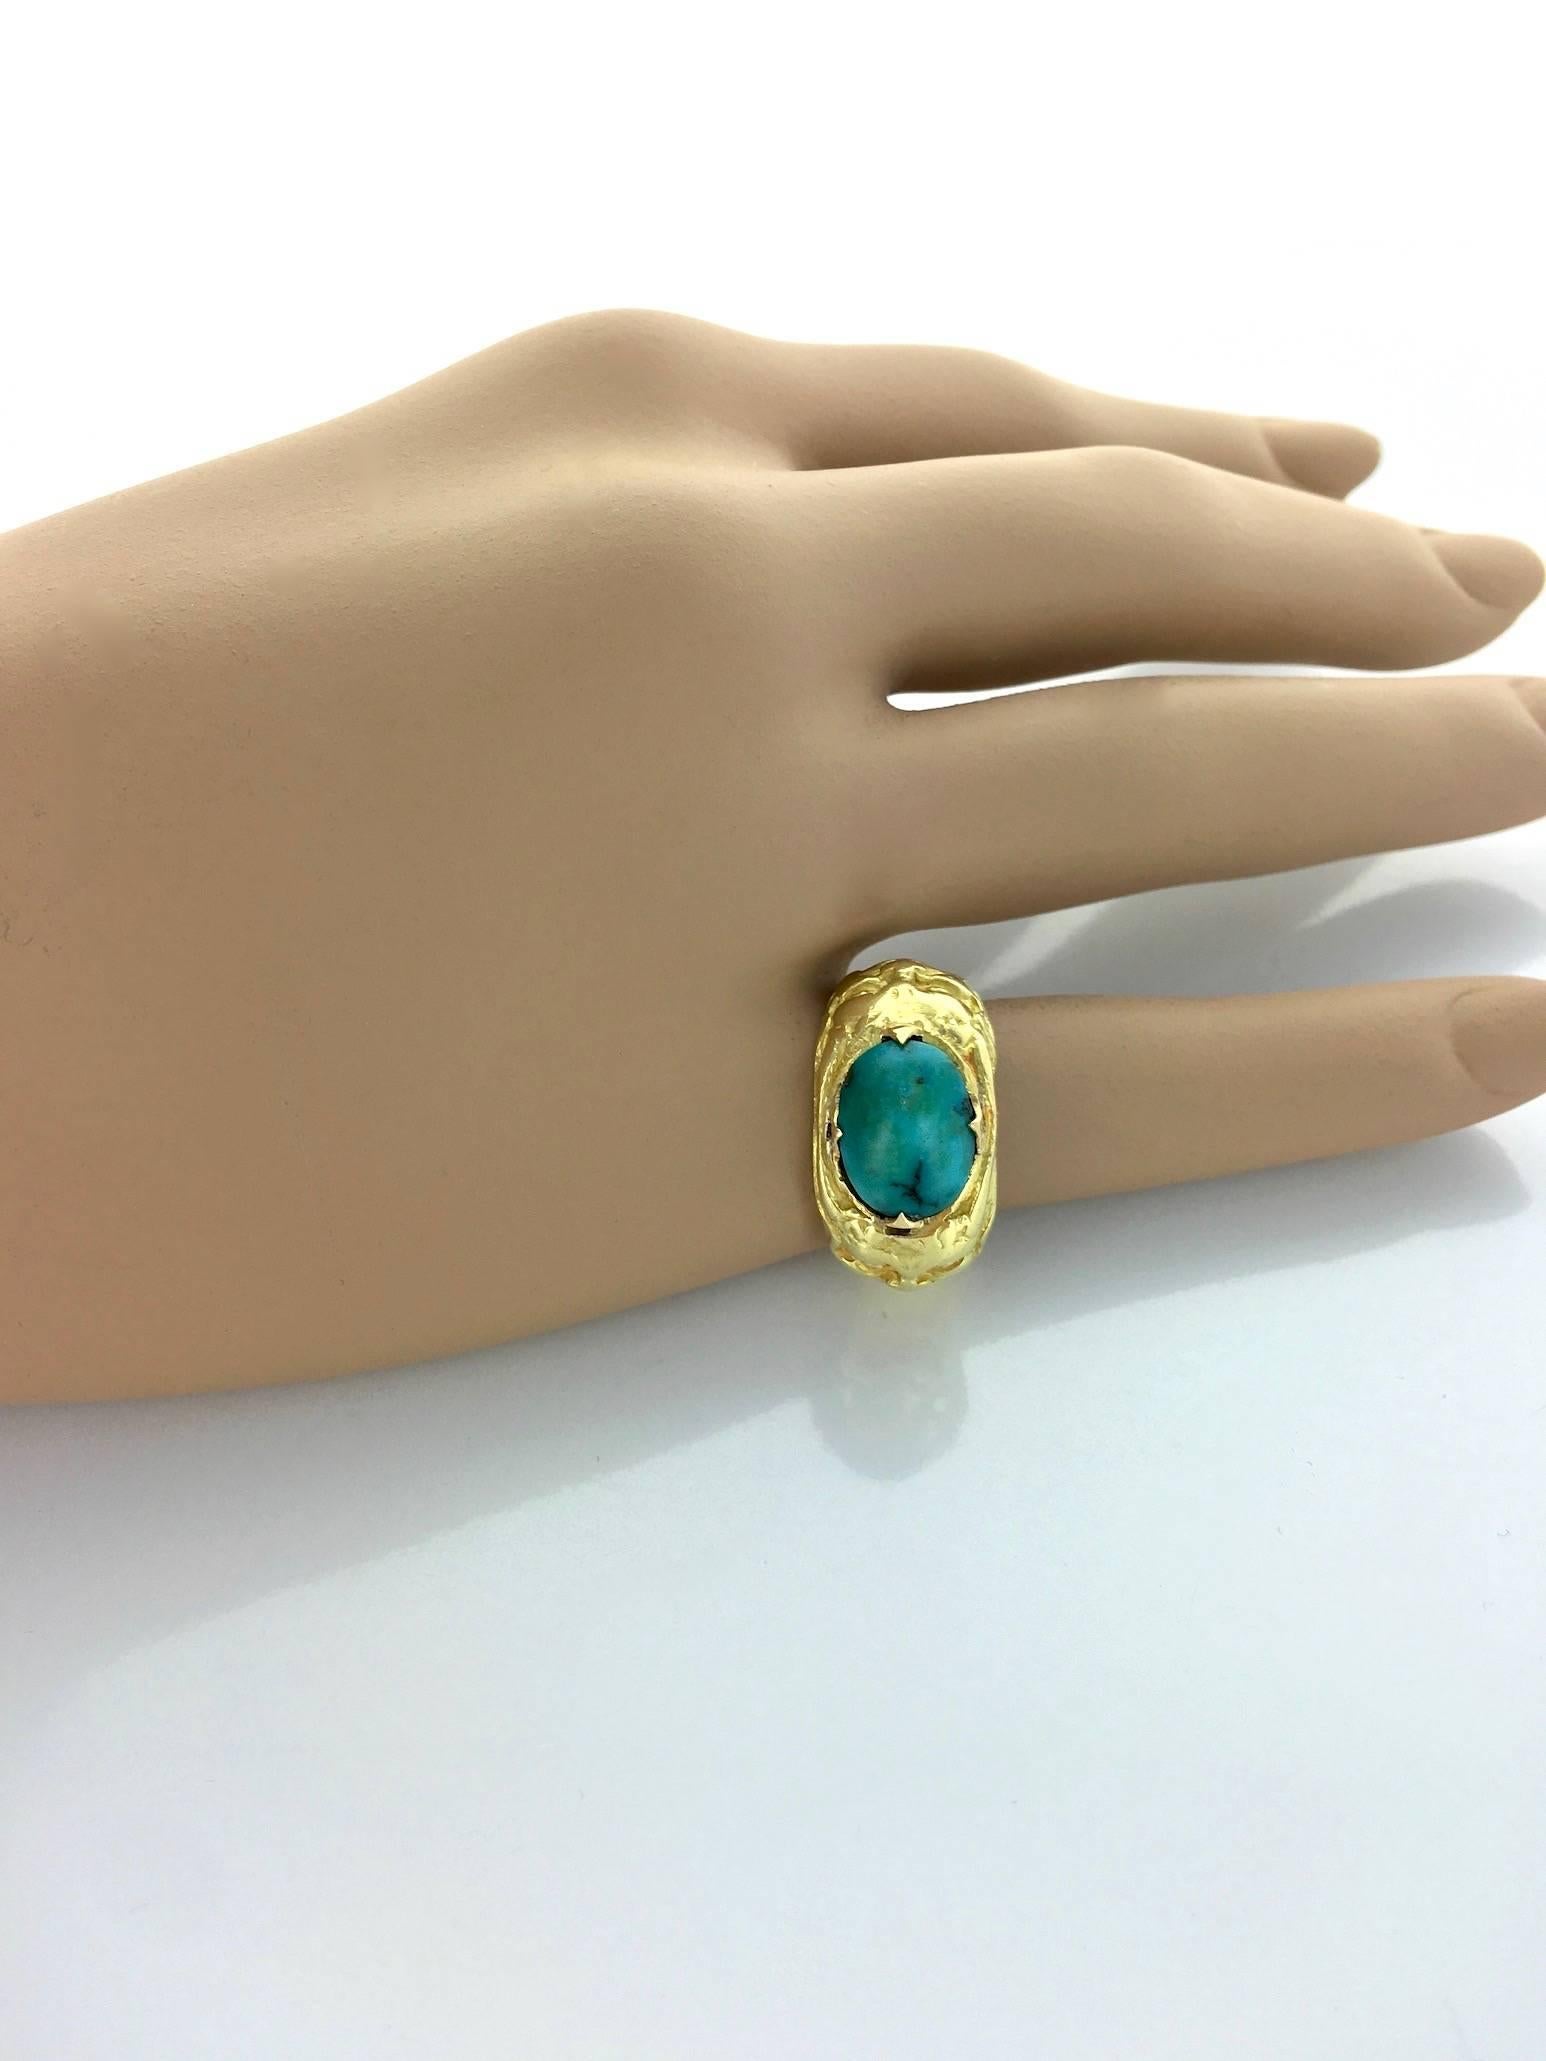 1900s French Art Nouveau Turquoise and Gold Ring 2